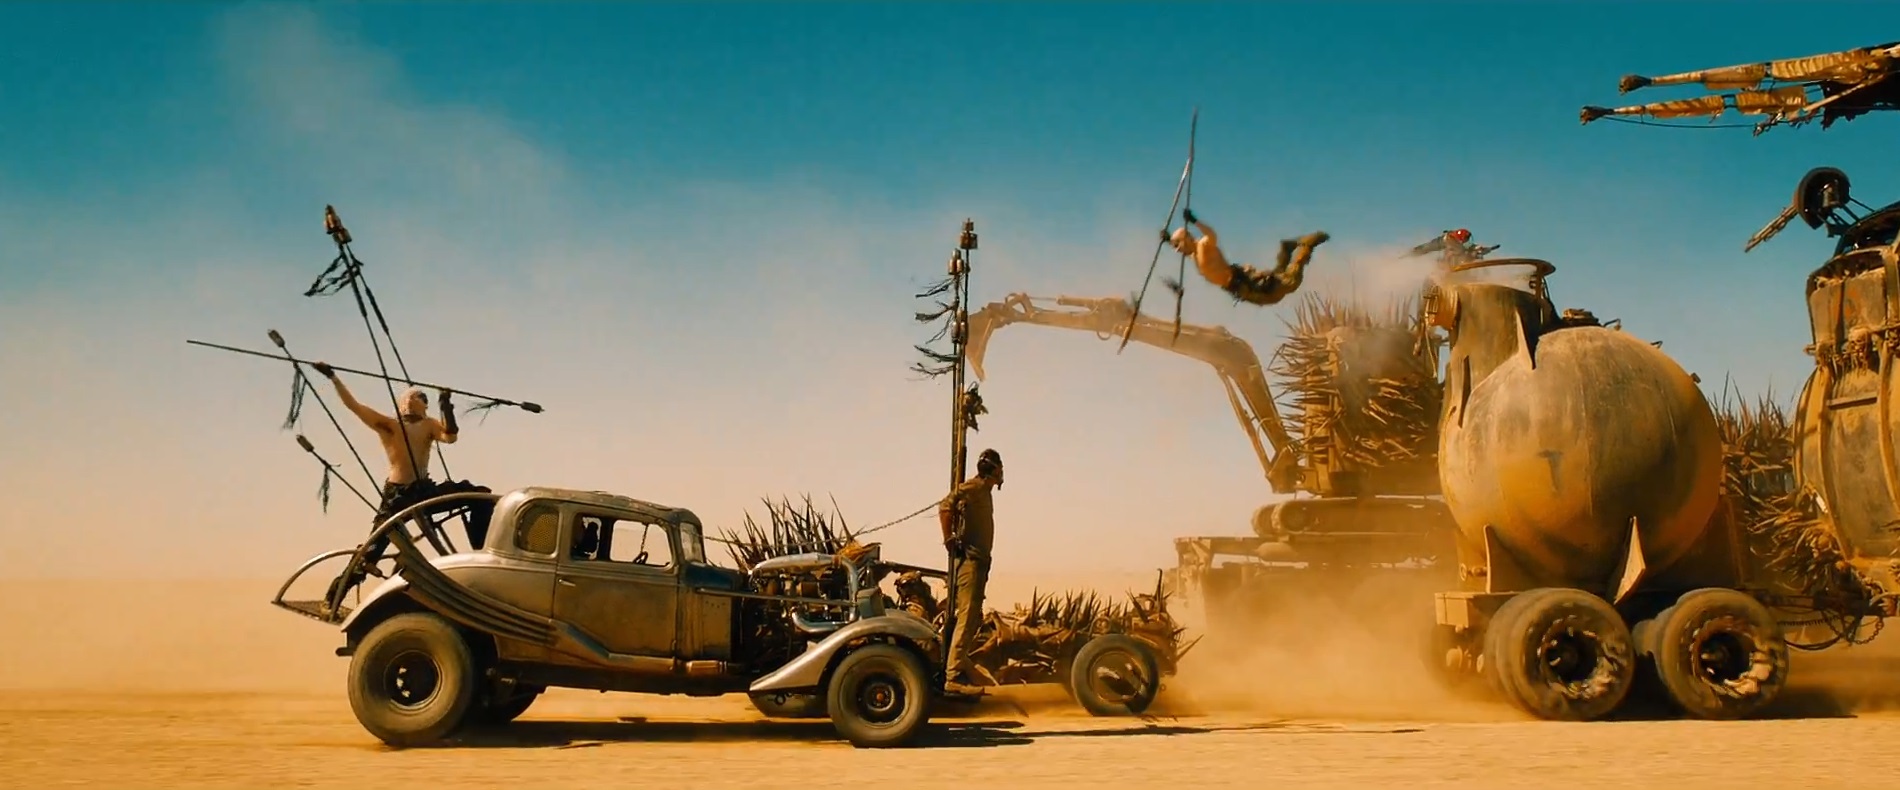 Download Mad Max: Fury Road Hollywood full movie 2015